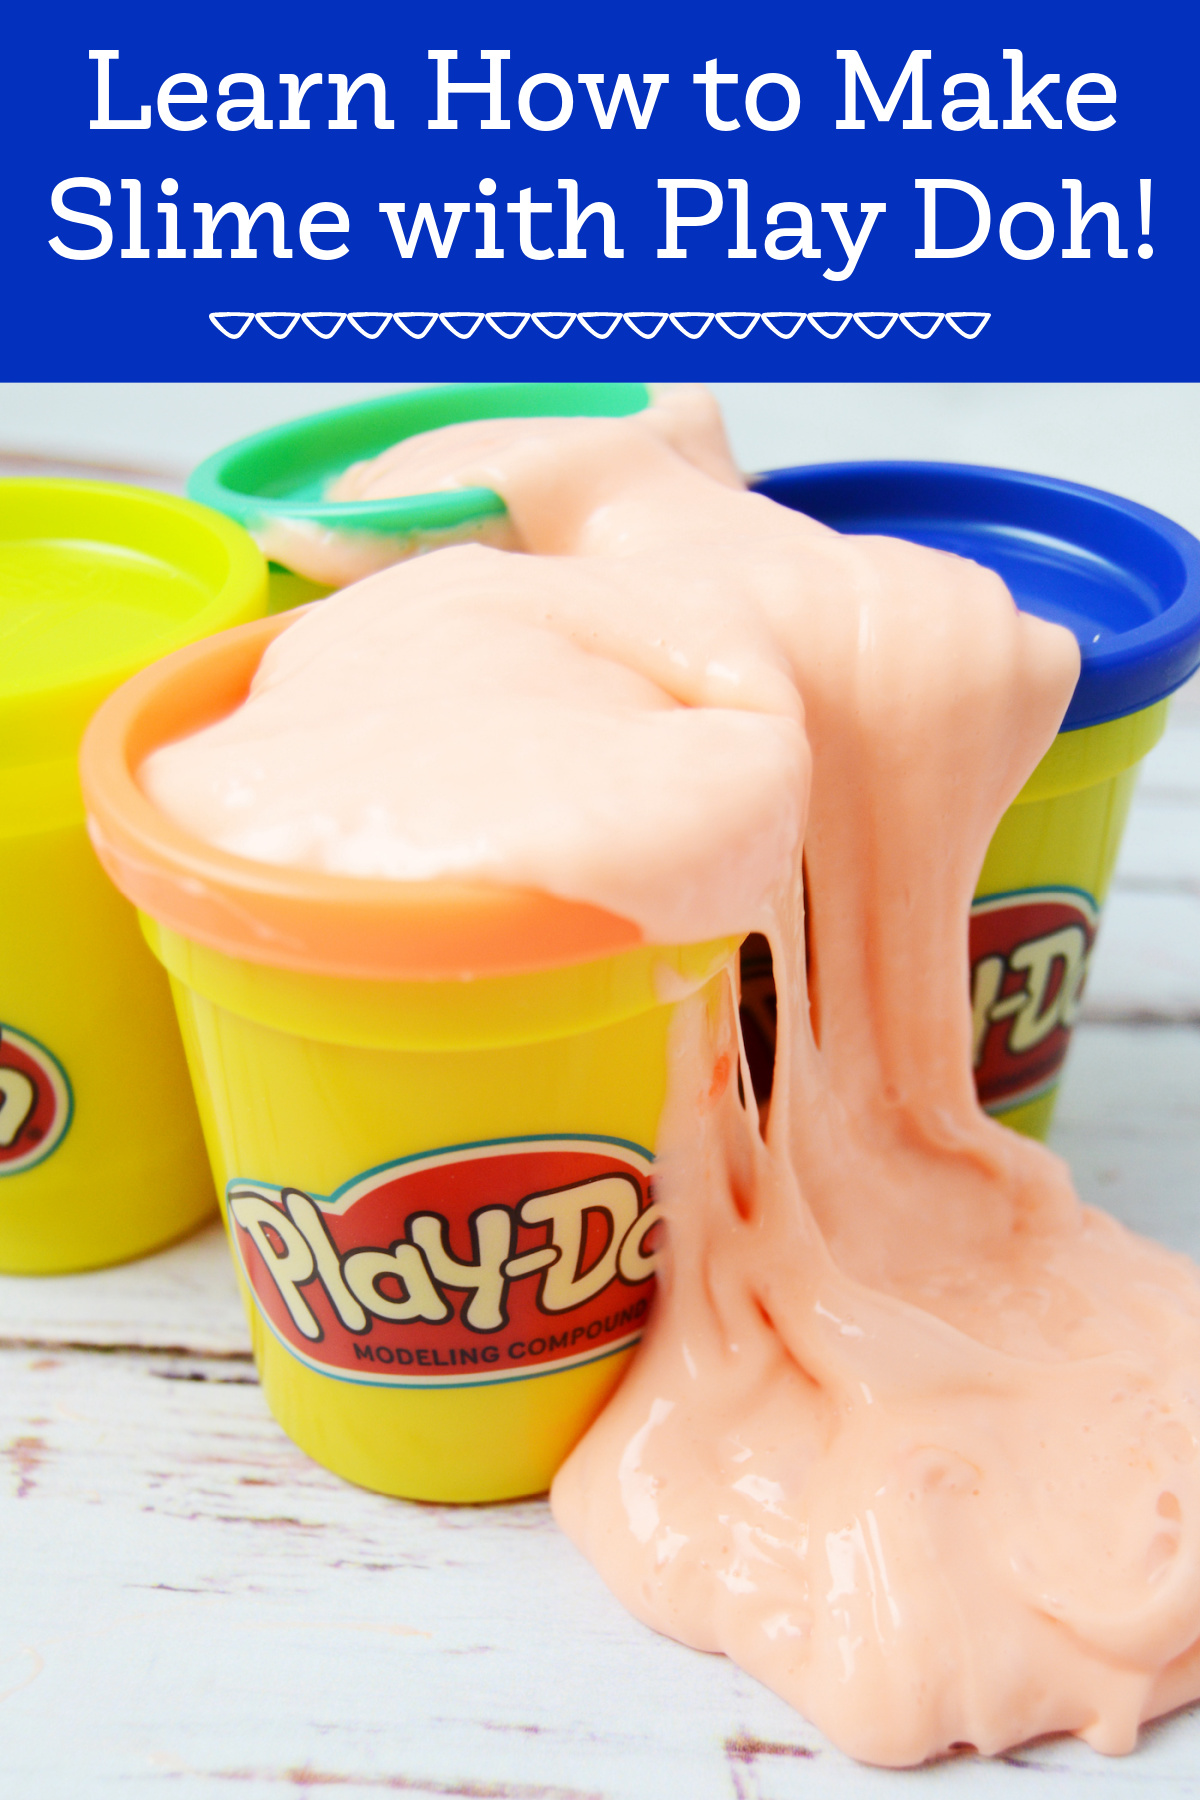 Learn How to Make Slime with Play Doh!